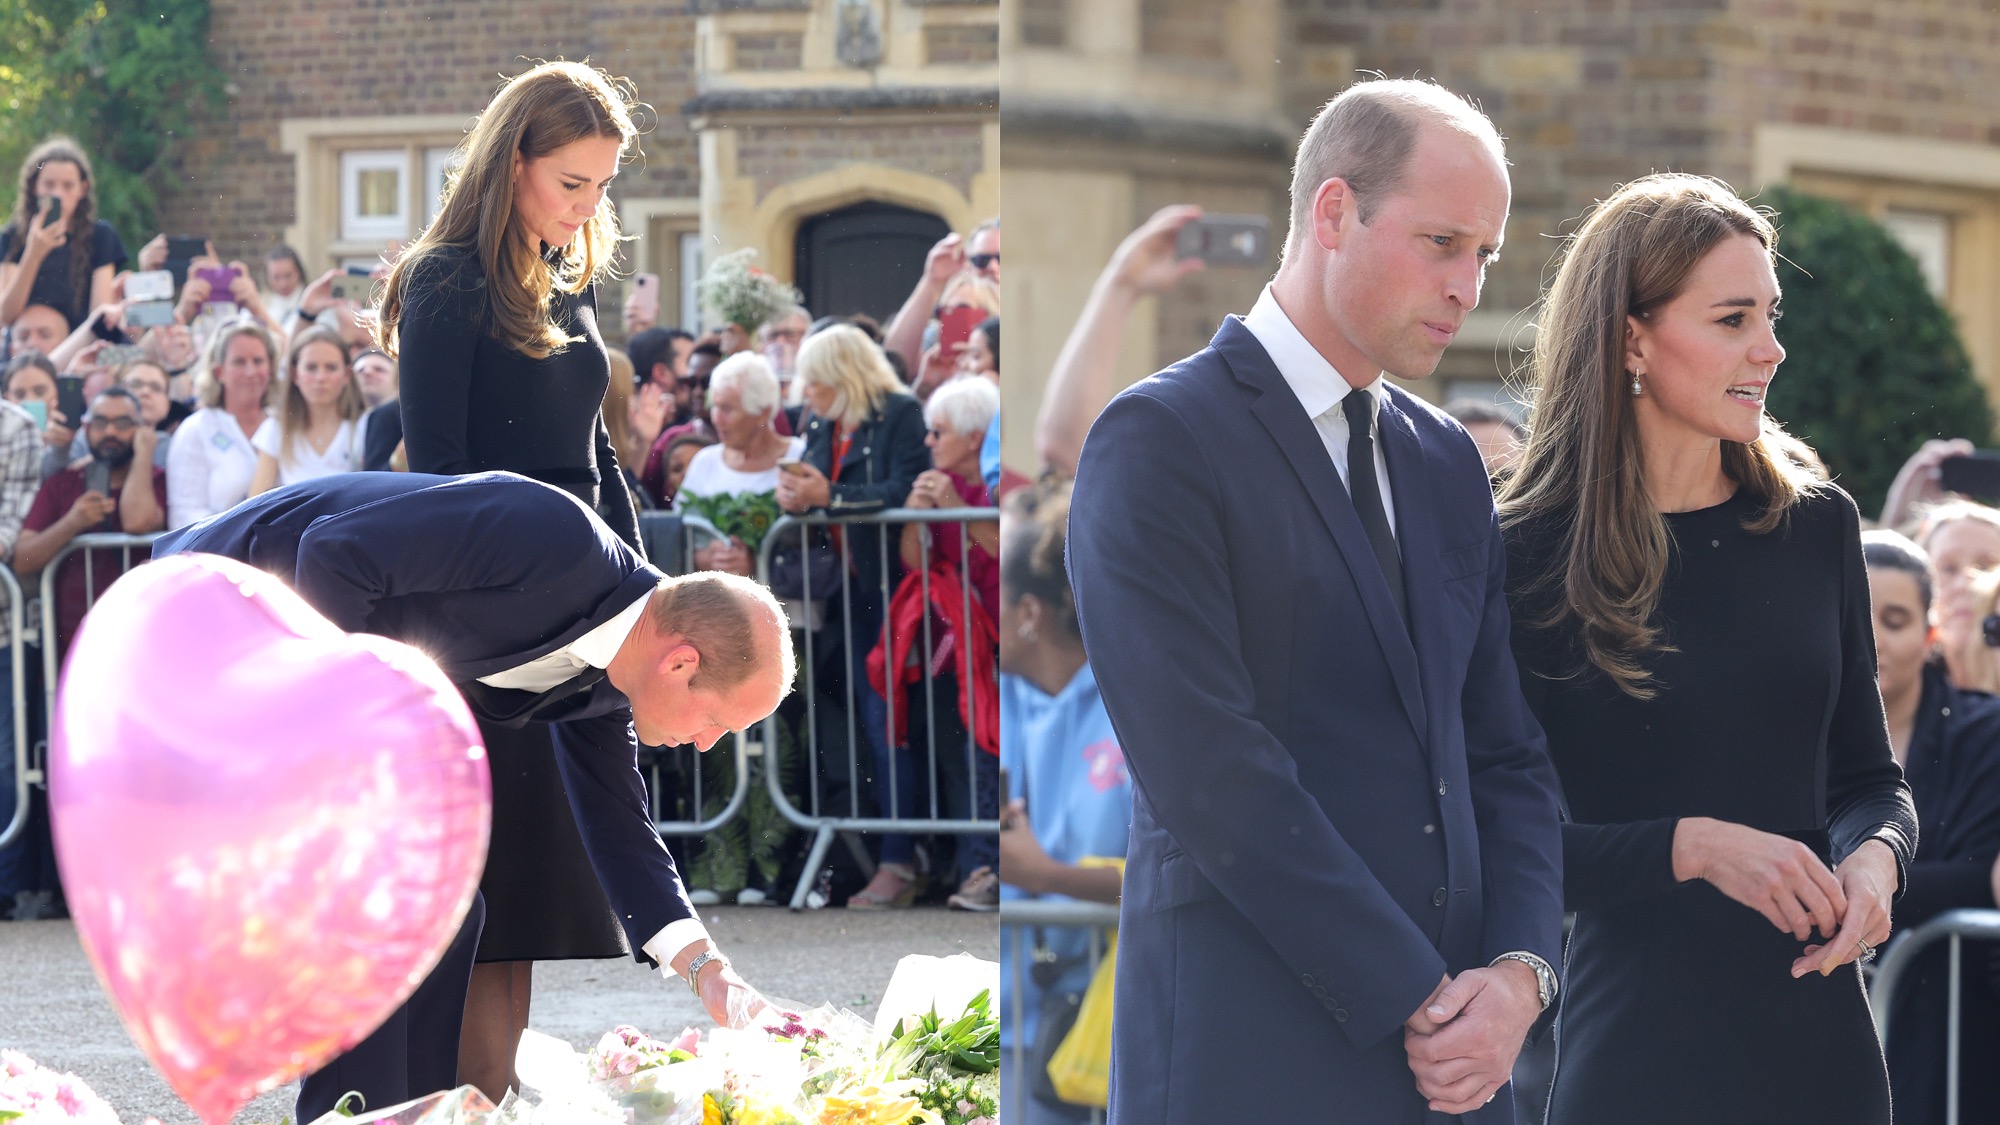 (L) Prince William bends down to look at a tribute to Queen Elizabeth II while Kate Middleton looks on. (R) Prince William and Kate Middleton stand side-by-side while taking in tributes to the queen.